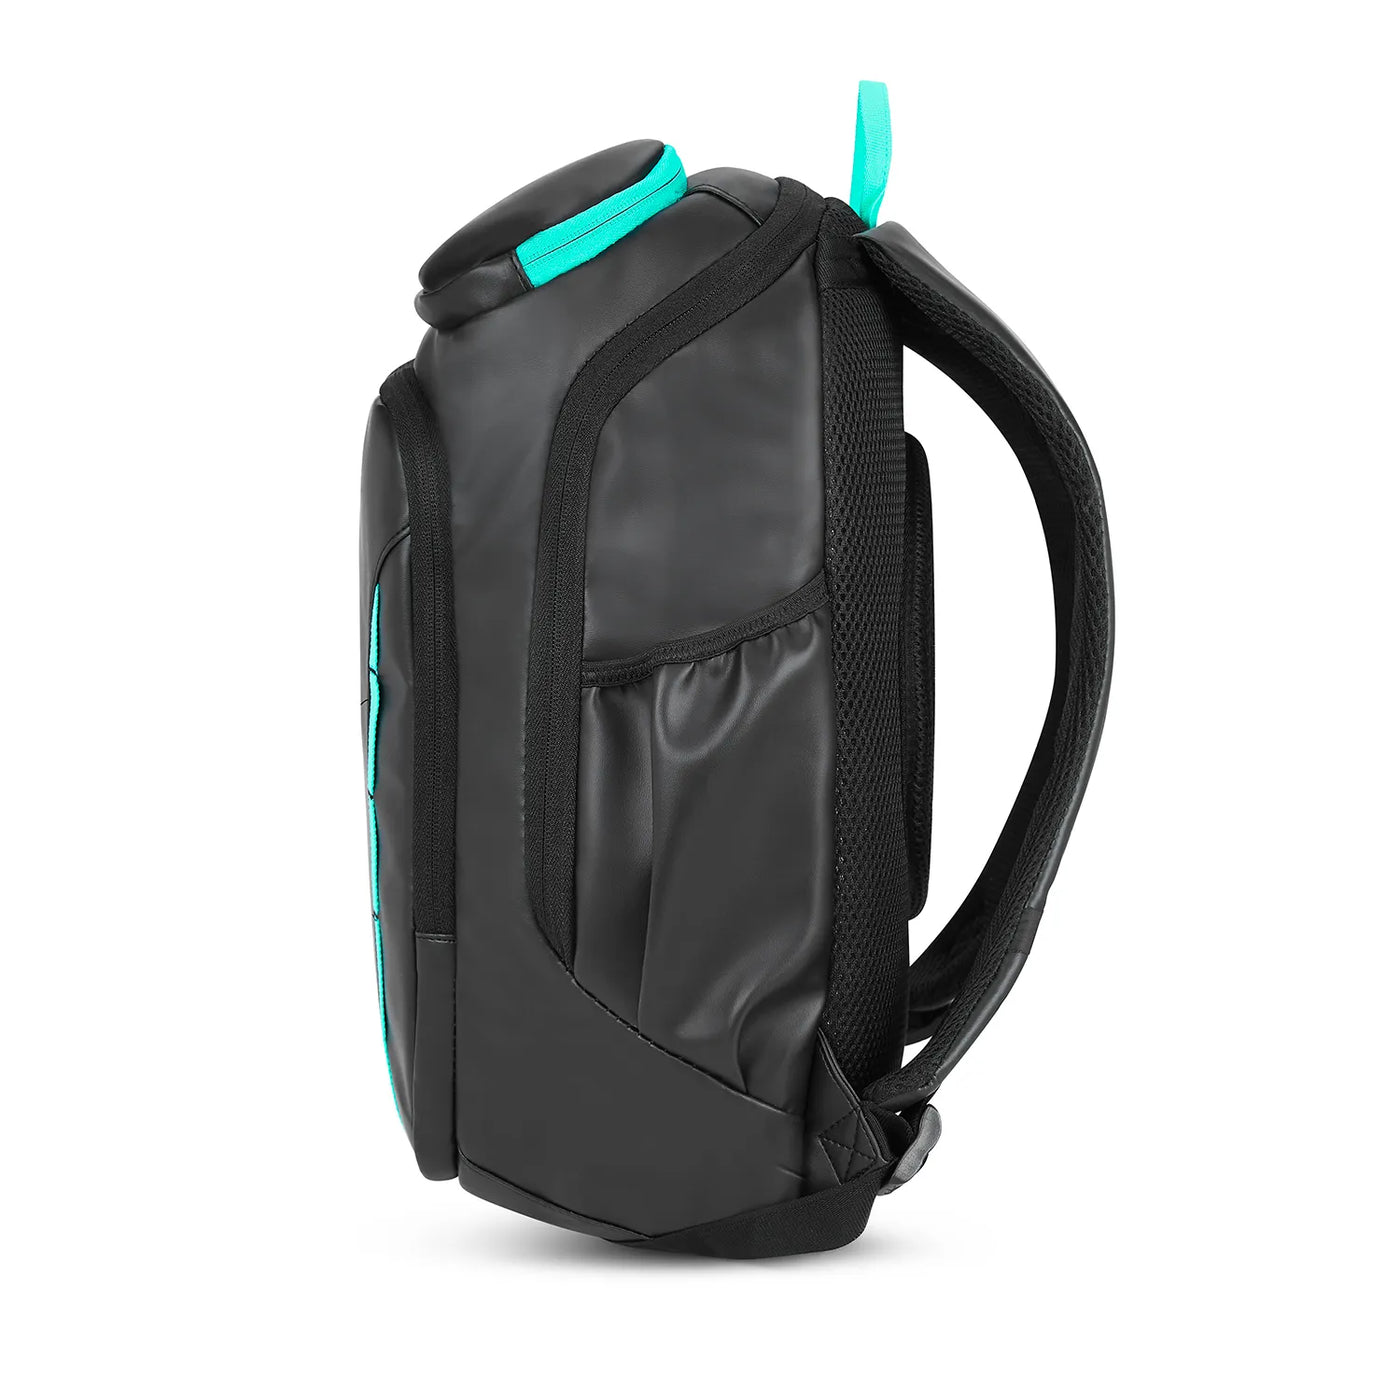 Skybags Valor NXT "02 Laptop Backpack Black"